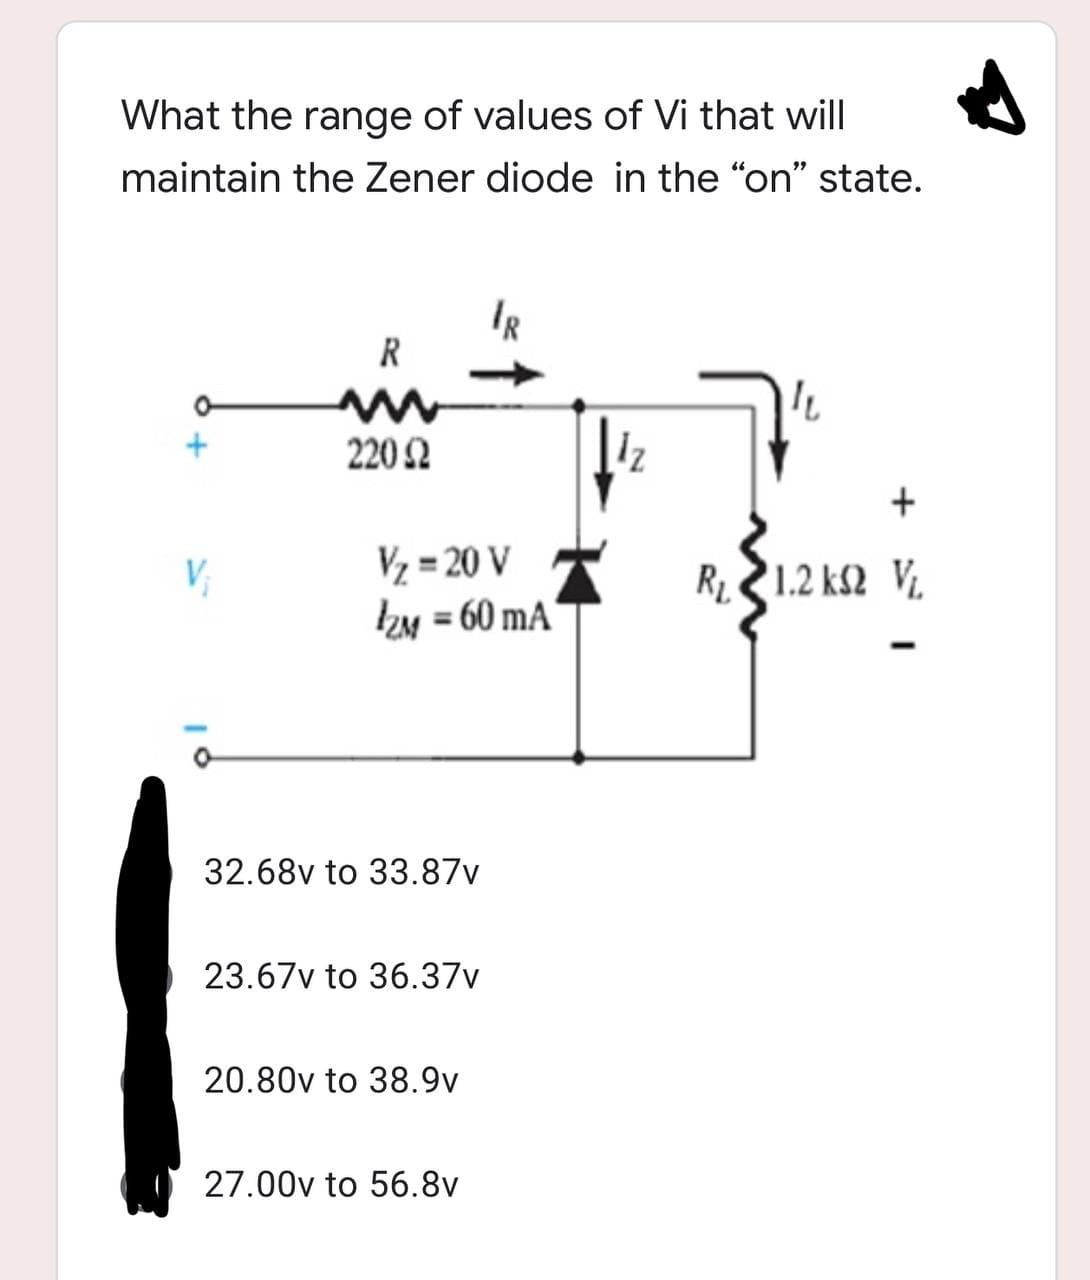 What the range of values of Vi that will
maintain the Zener diode in the "on" state.
IR
R
"
220 Ω
V₁
R, 21.2 ΚΩ V
V/₂= 20 V
12M=60 mA
32.68v to 33.87v
23.67v to 36.37v
20.80v to 38.9v
27.00v to 56.8v